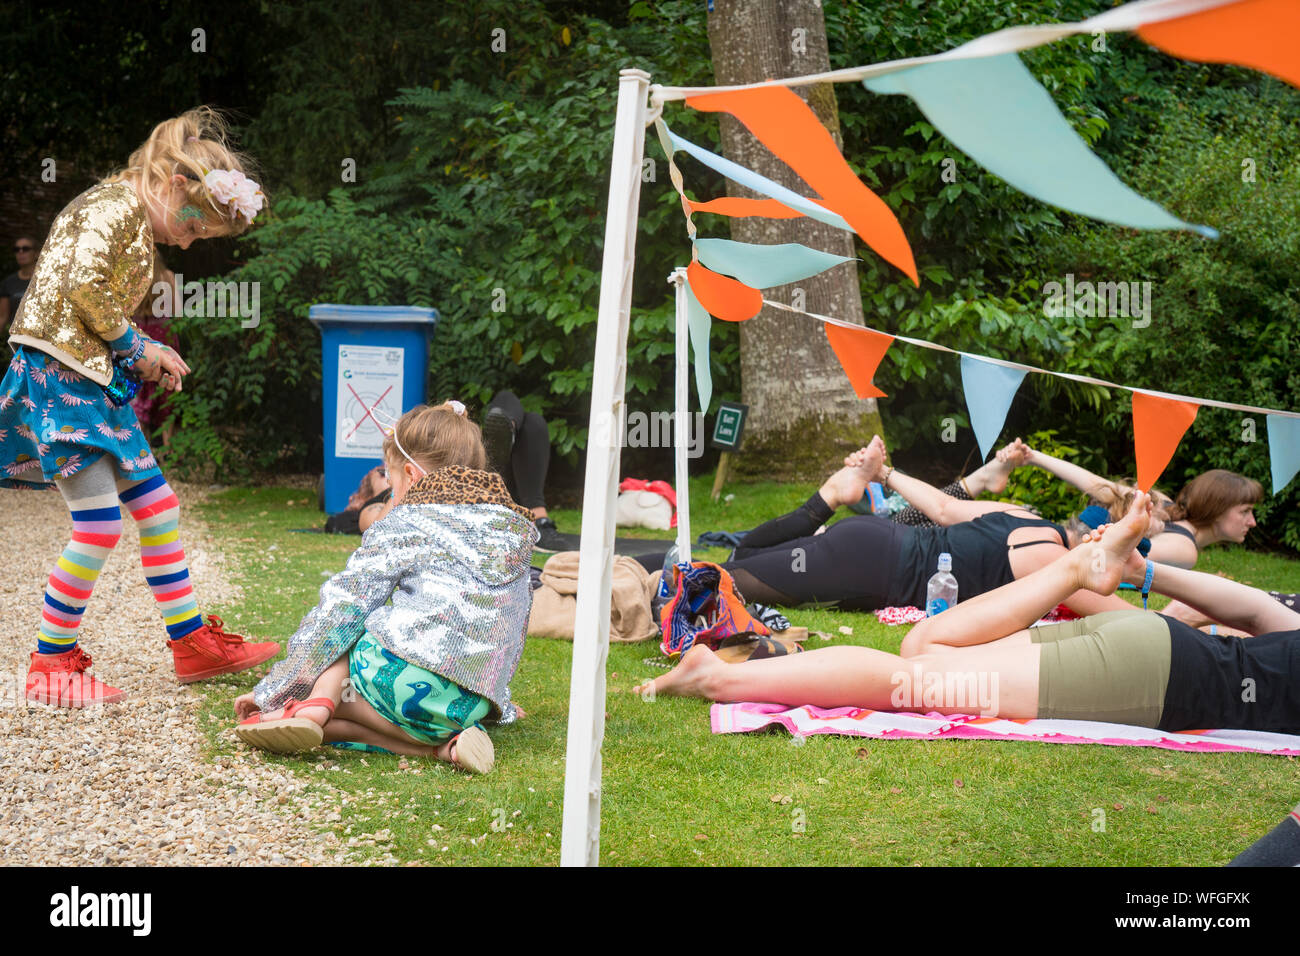 Dorset, UK. Saturday, 31 August, 2019. Views of the 2019 End of the Road Festival. Photo: Roger Garfield/Alamy Live News Stock Photo